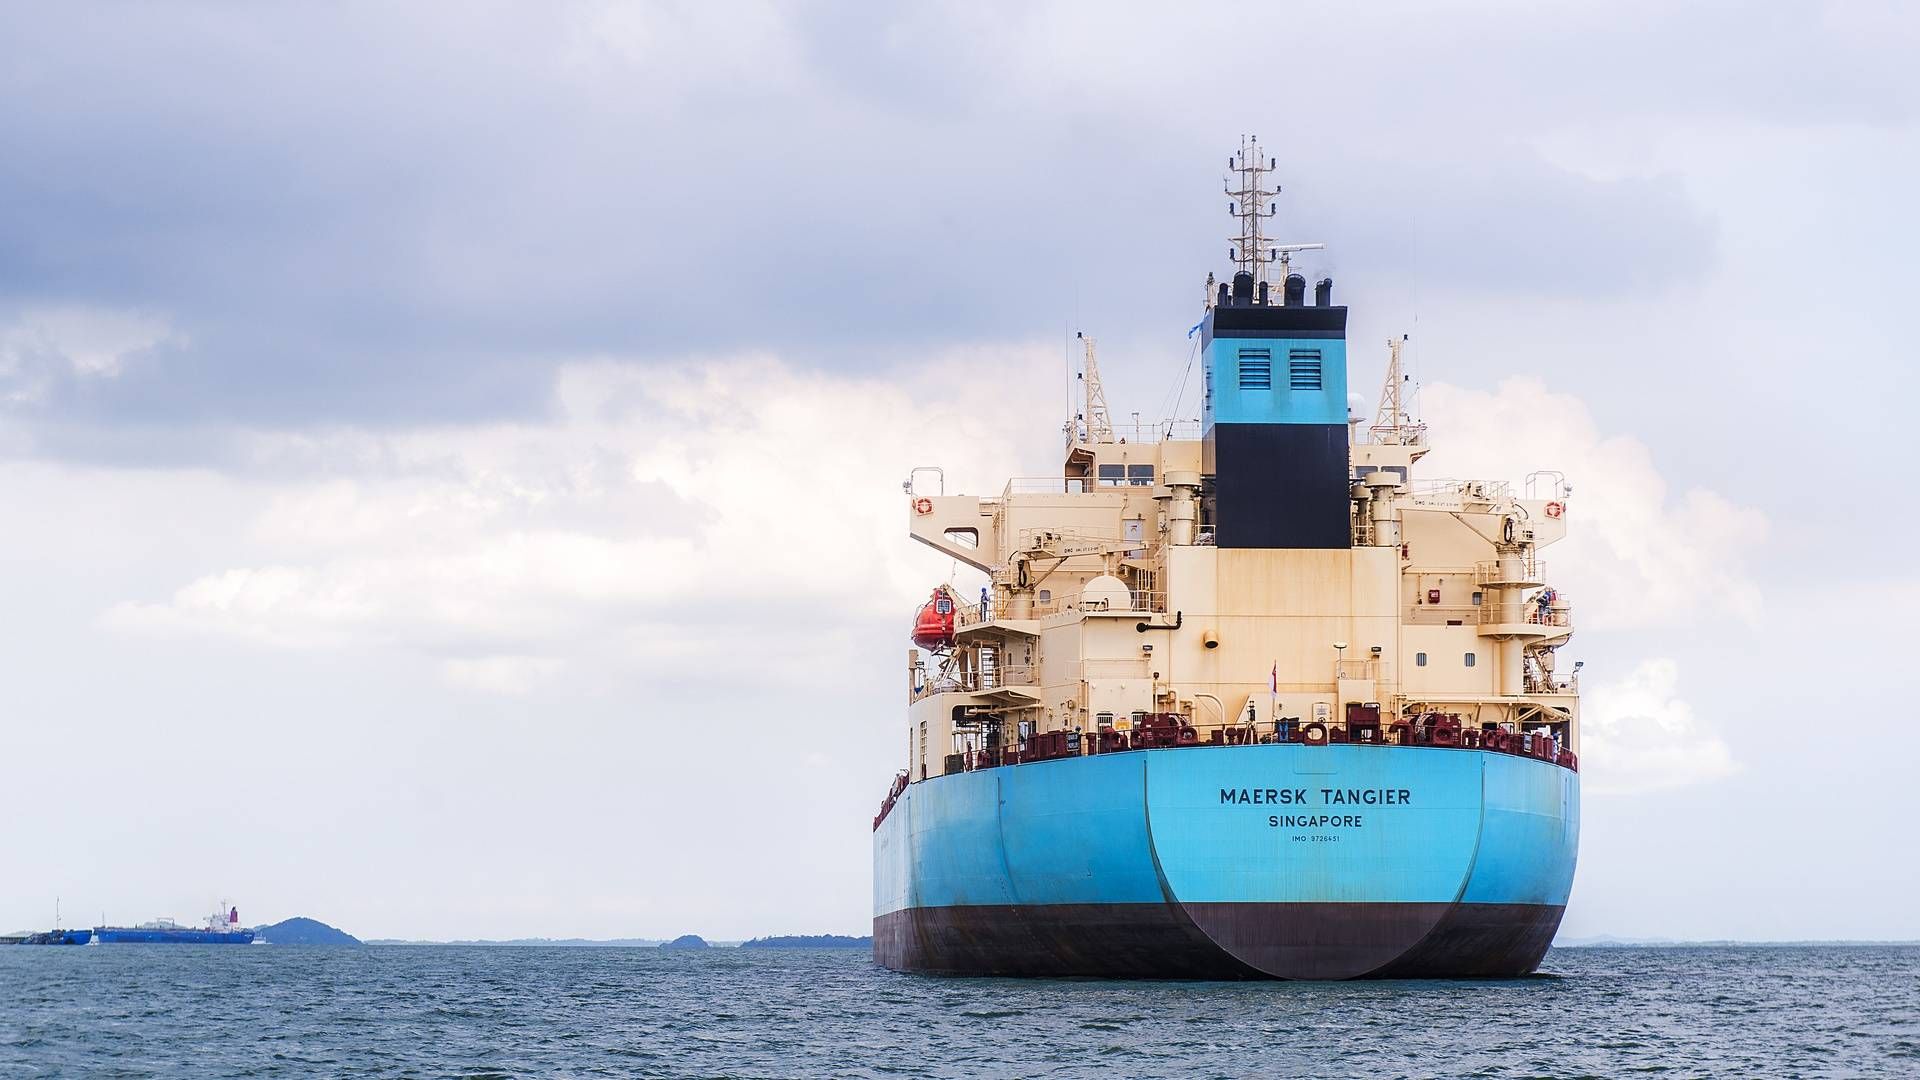 It’s not certain that Maersk Tankers’ ships actually will avoid the Red Sea in practice or for how long. In the past, large tanker companies have veered away from the area for short periods of time, but the extra fuel cost and cargo delays have tended to make such deviations temporary. | Photo: Pr/maersk Tankers